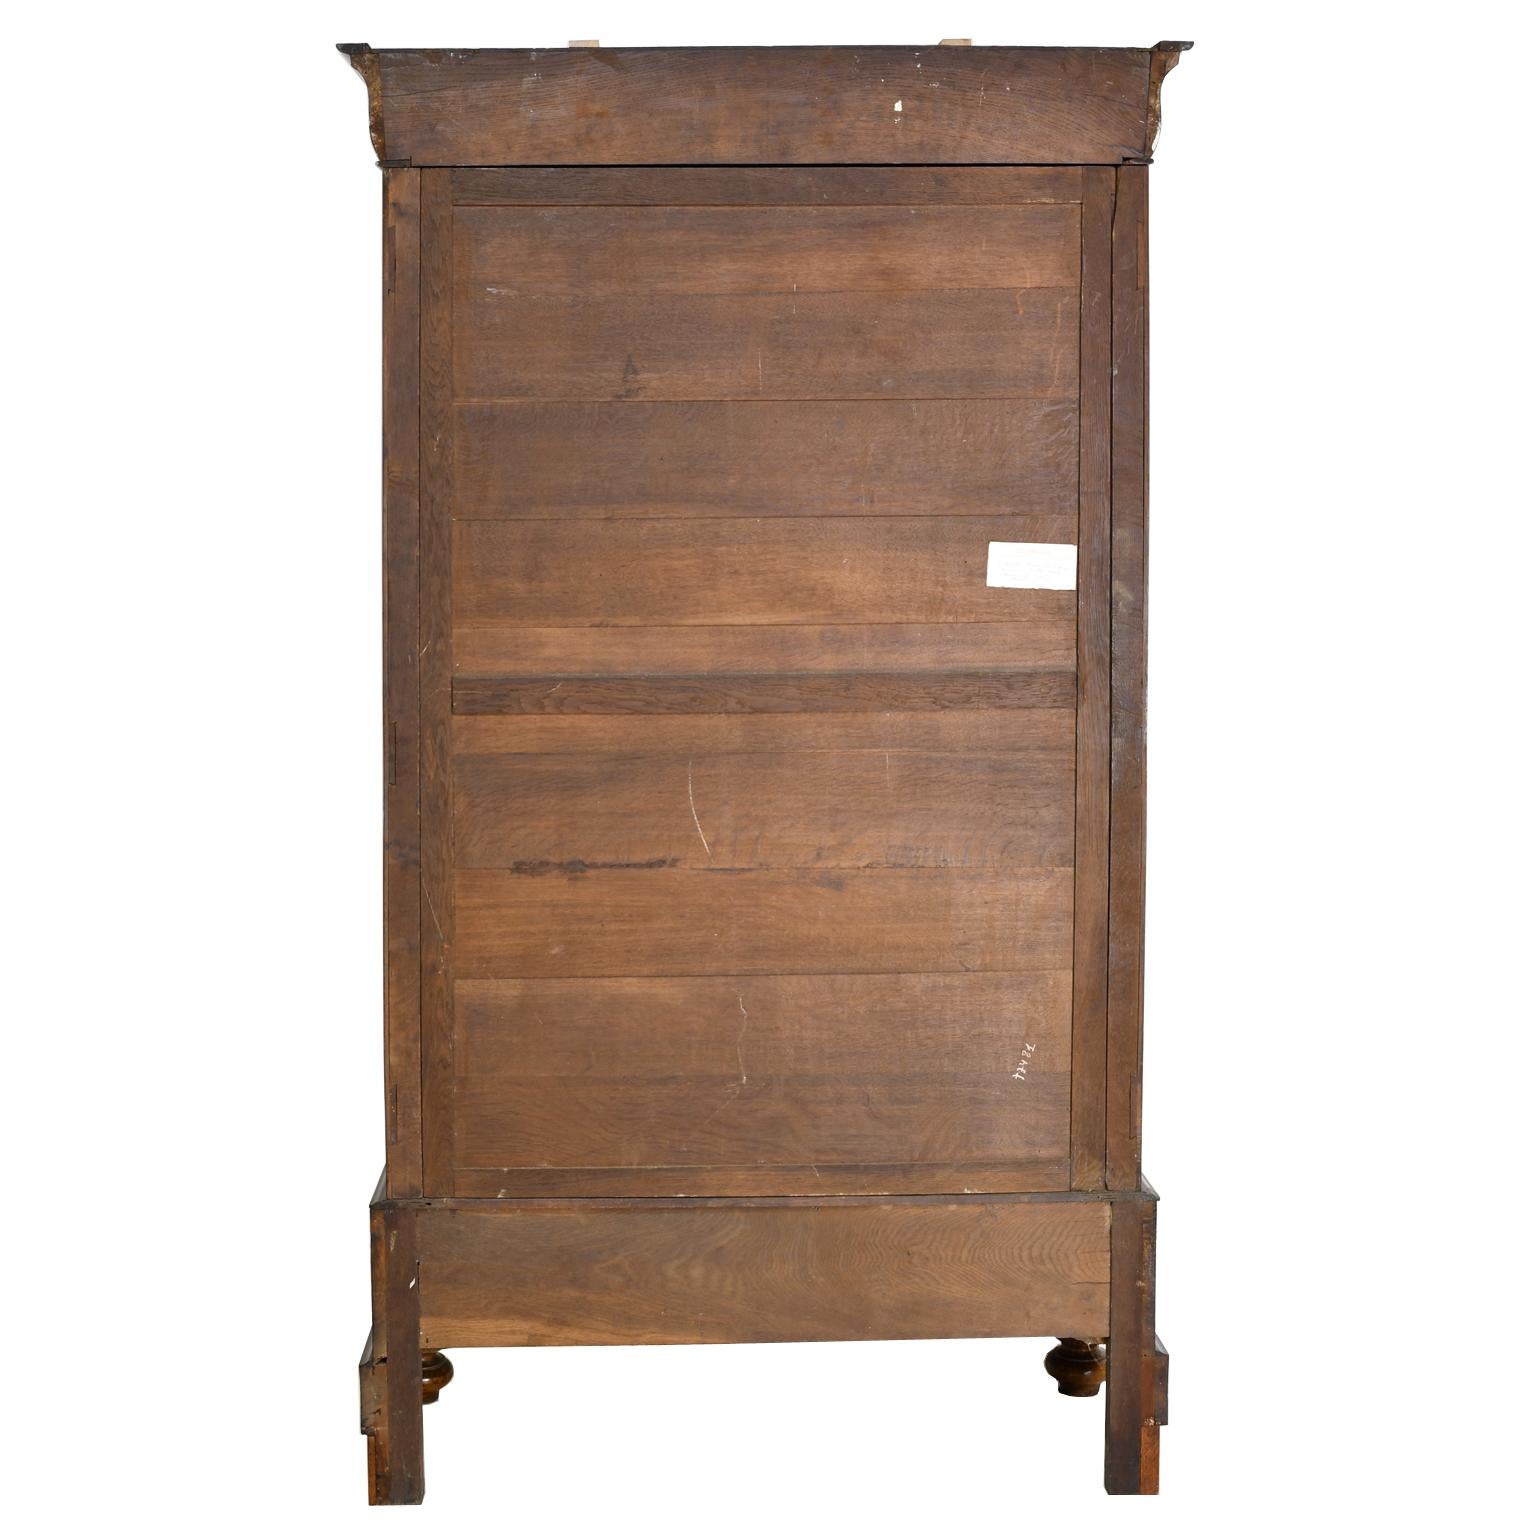 Mid-19th Century Tall and Narrow French Louis Philippe Armoire with Mirrored Door, circa 1830